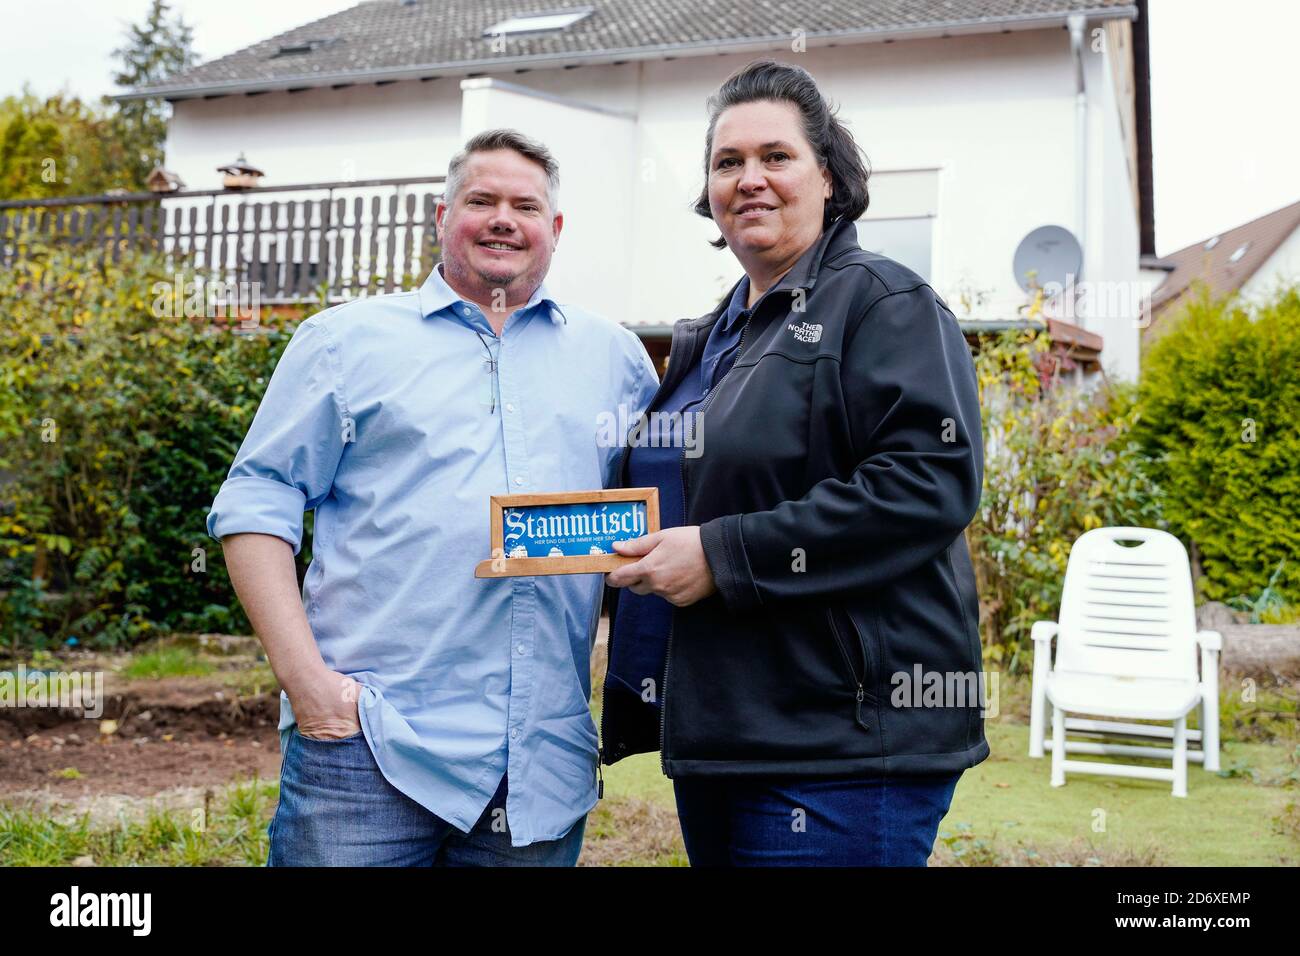 Ramstein Miesenbach, Germany. 14th Oct, 2020. Will and Bianka Pfannenstiel are standing in the garden in front of their house and hold a sign in their hands that says 'Stammtisch'. (to dpa 'Between Trump and drones: In Ramstein the election fever is slowly rising') Credit: Uwe Anspach/dpa/Alamy Live News Stock Photo